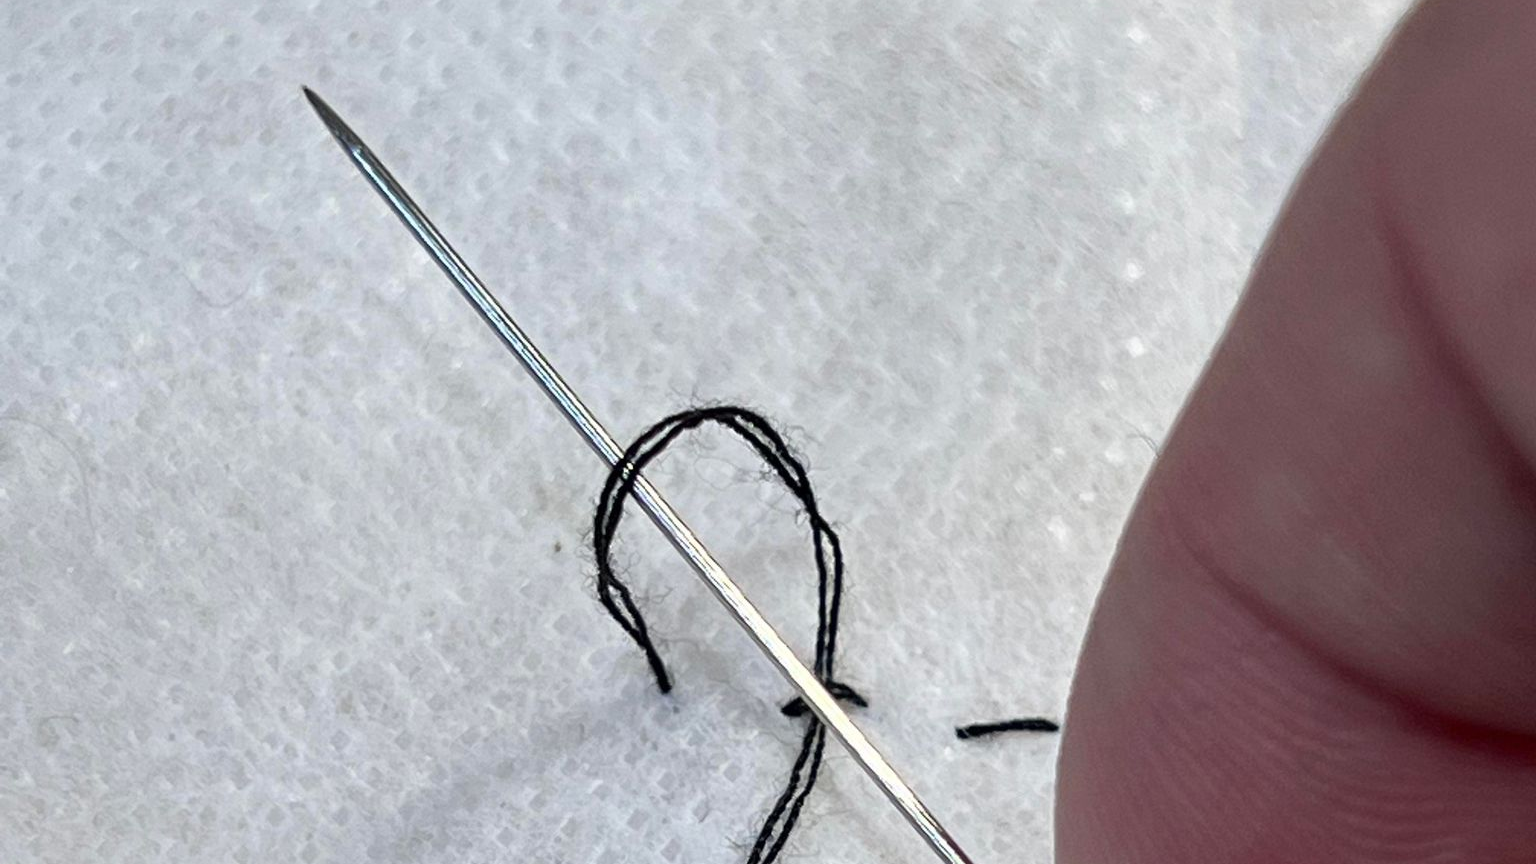 Insert your needle through the loop and pull taut to form a knot.